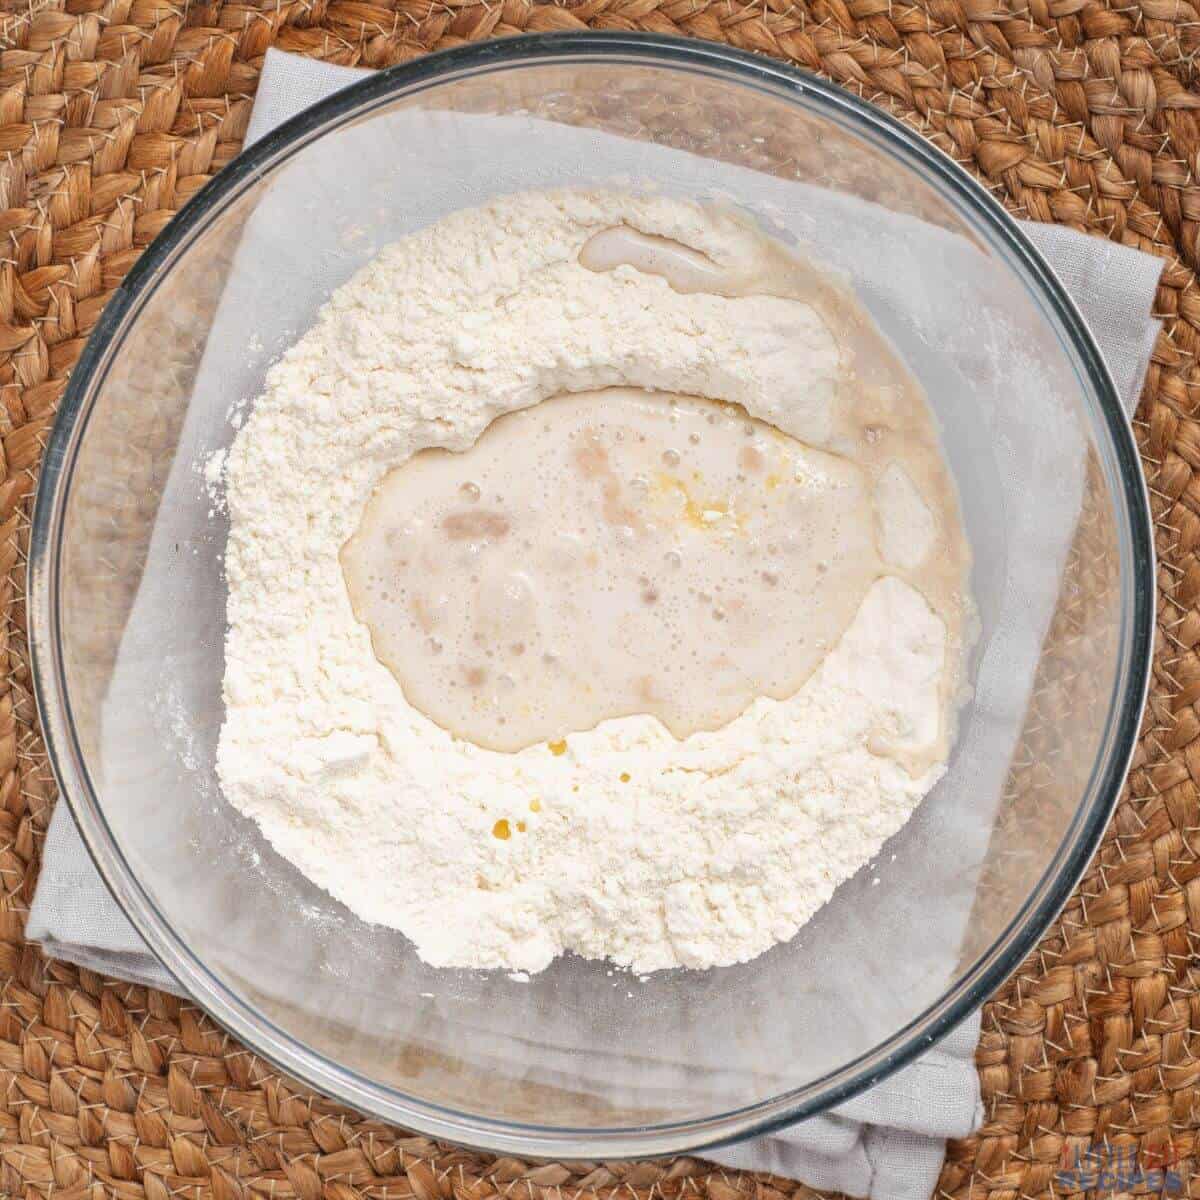 flour and yeast mixture with butter in bowl.